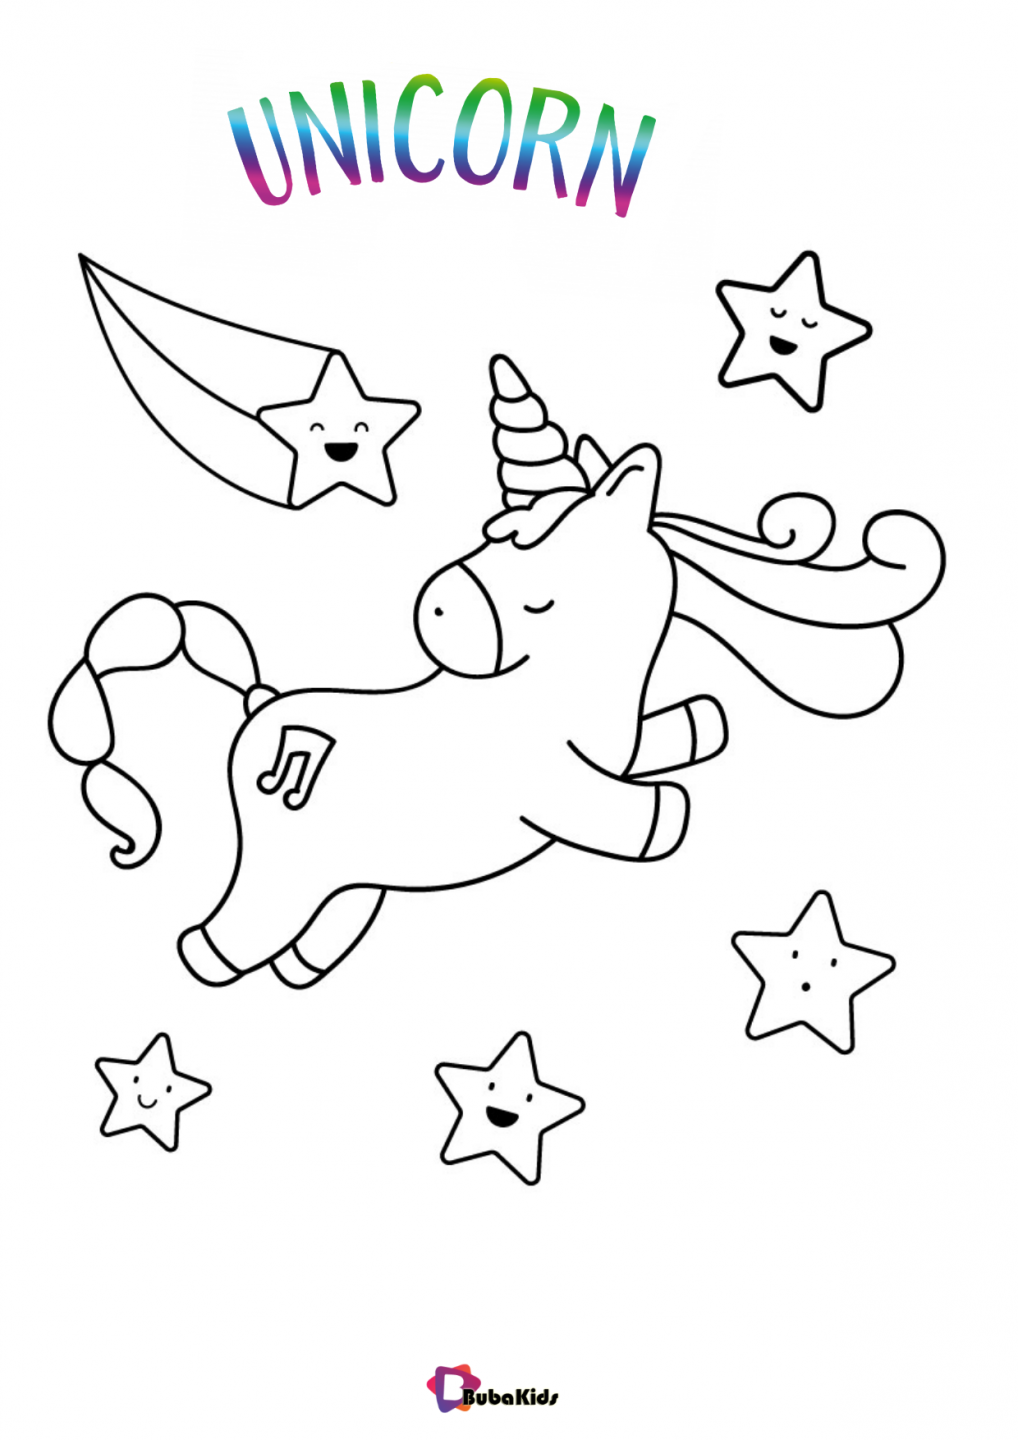 Flying unicorn with stars coloring pages | BubaKids.com